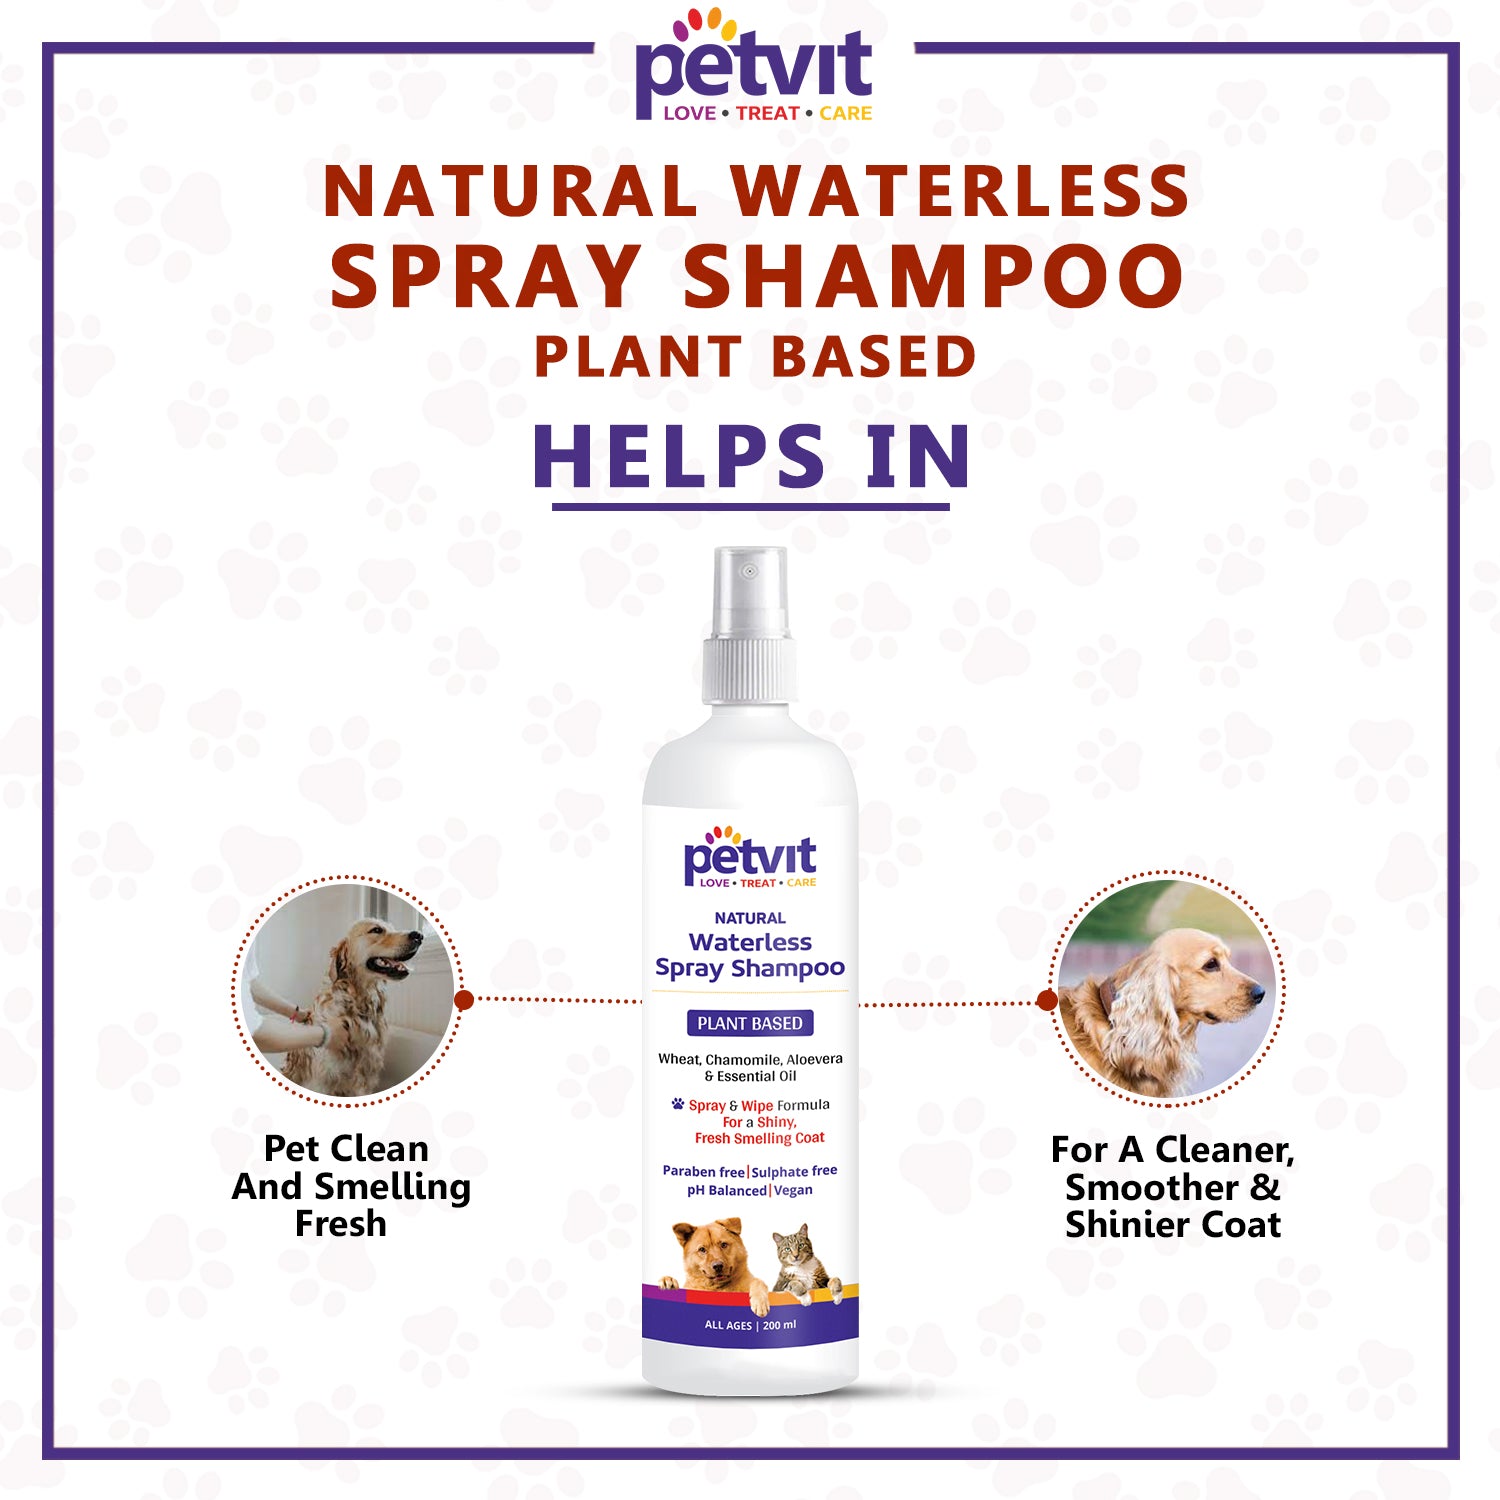 Plant Based Natural Waterless Spray Shampoo With Wheat Protein, Lemongrass Oil, Lavender, Rosemary, Eucalyptus, Coconut Oil, Castor Oil |For a Cleaner, Smoother & Shinier Coat | Dry | Waterless | pH-Balance | For All Breed Dog & Cat - 200ml